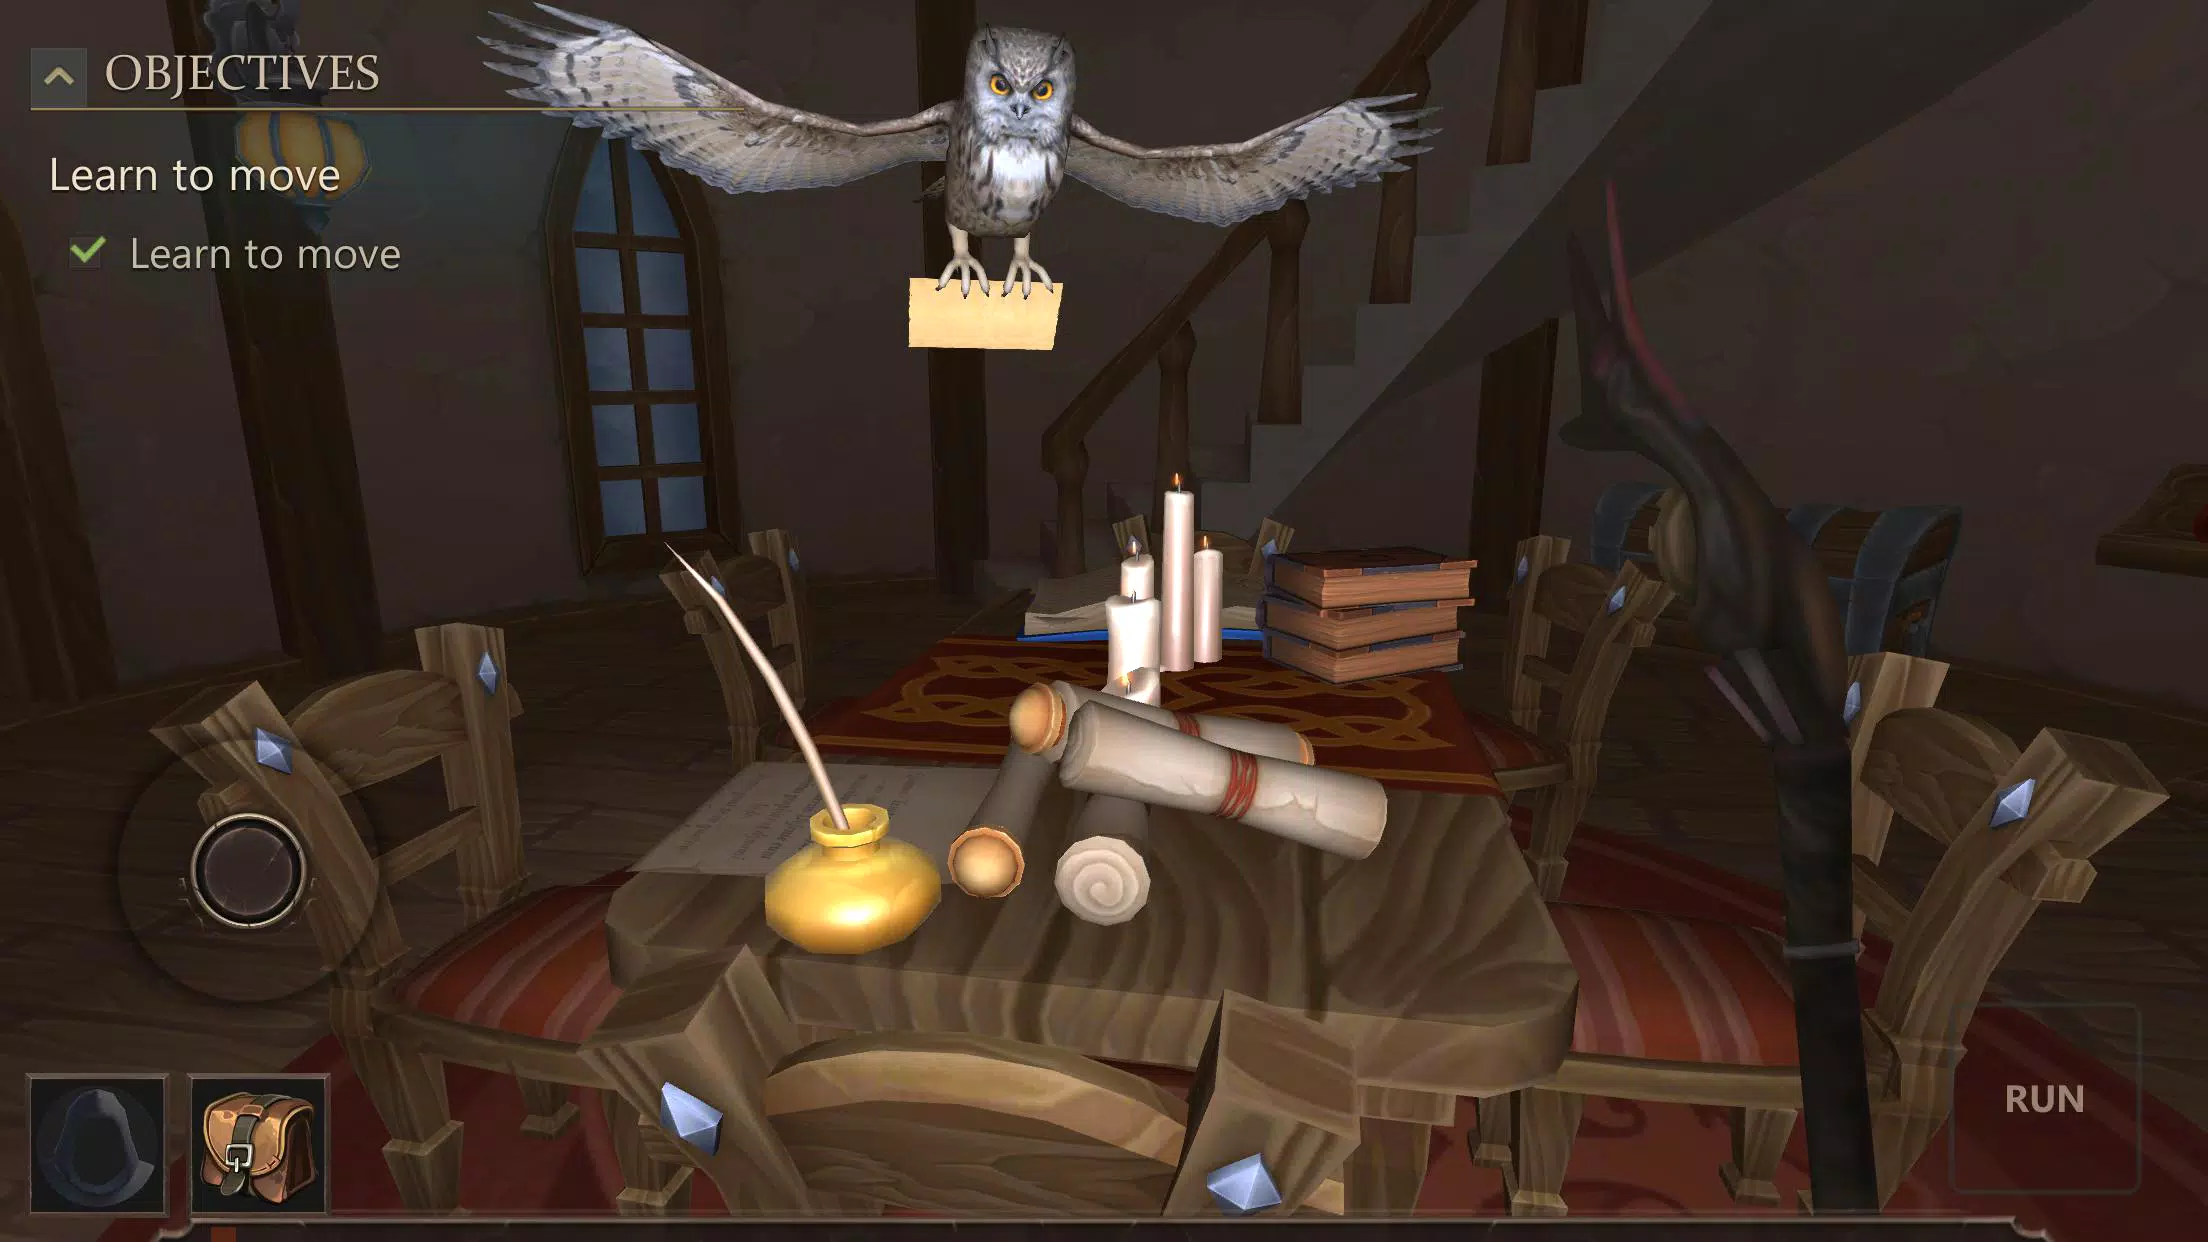 Witches & Wizards APK v0.6.0 Free Download - APK4Fun